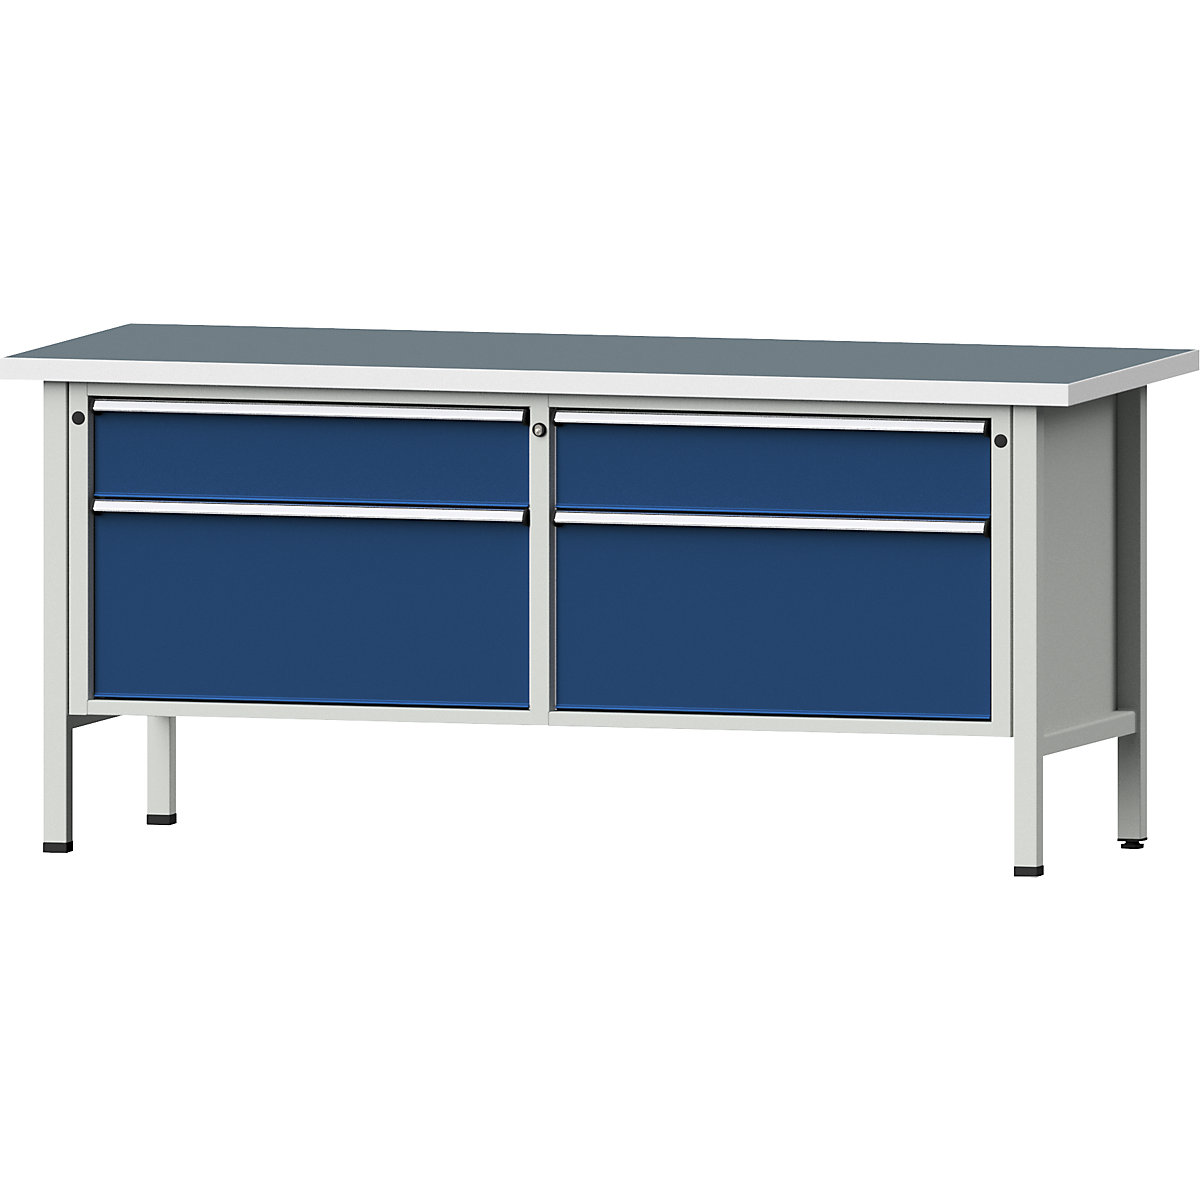 Workbenches 2000 mm wide, frame construction – ANKE, 4 drawers, universal worktop, height 890 mm-12